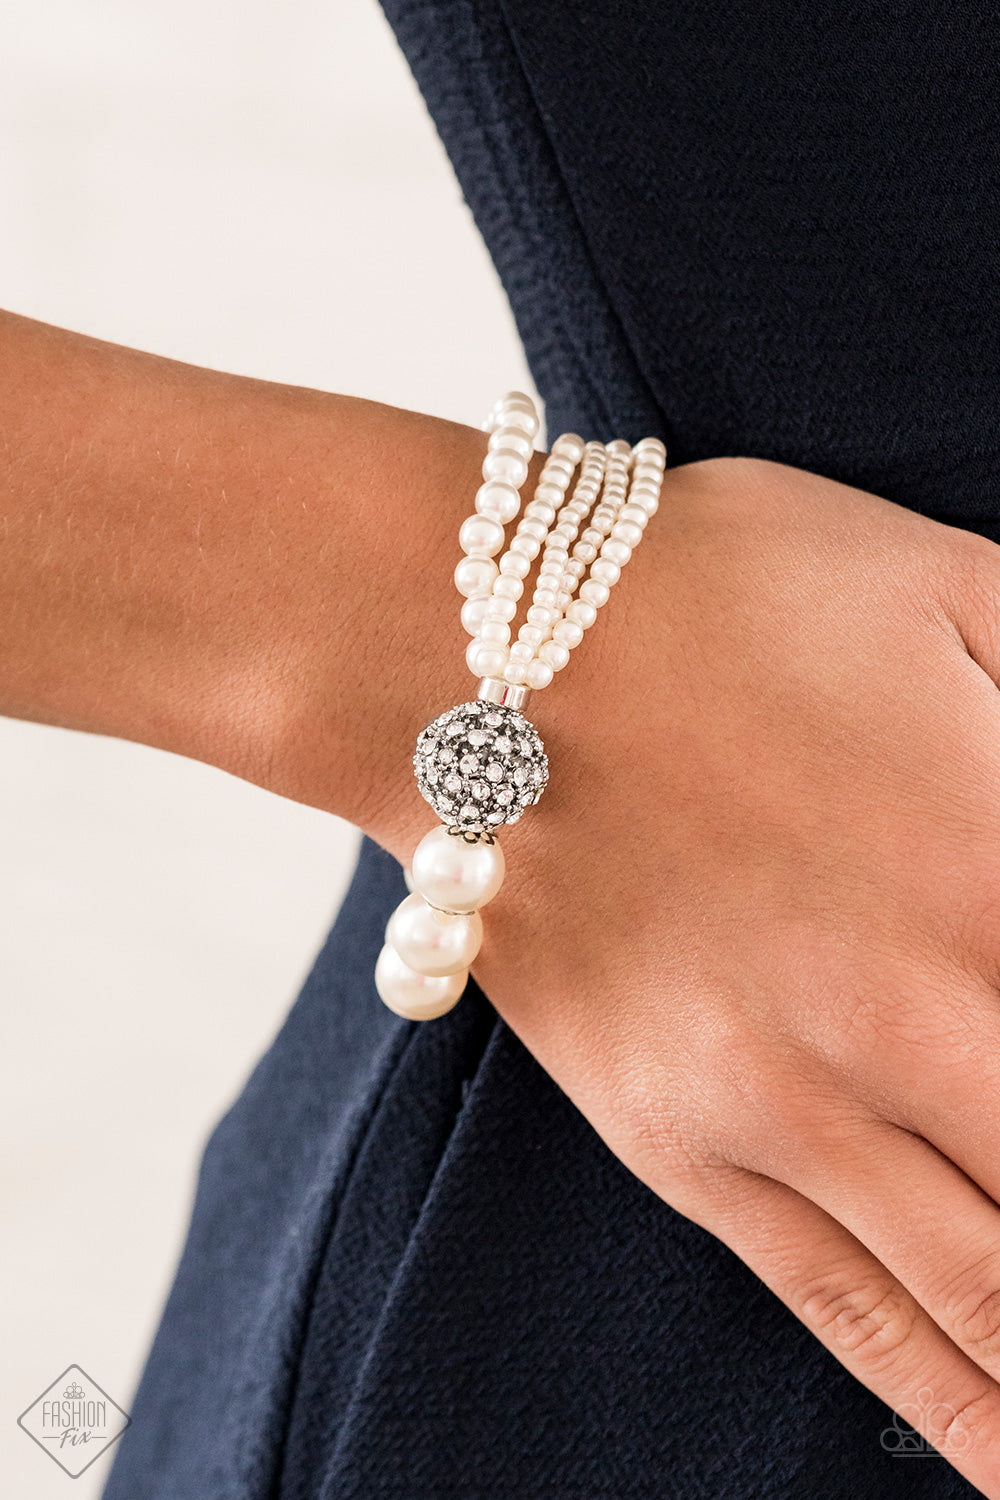 Show Them The DOOR White Bracelet - Paparazzi Accessories Item #B335 Featuring comfortable stretchy bands, a white rhinestone-encrusted silver bead connects strands of mismatched white pearls and a single strand of classic white pearls around the wrist in a timeless twist. All Paparazzi Accessories are lead free and nickel free!  Sold as one individual bracelet.